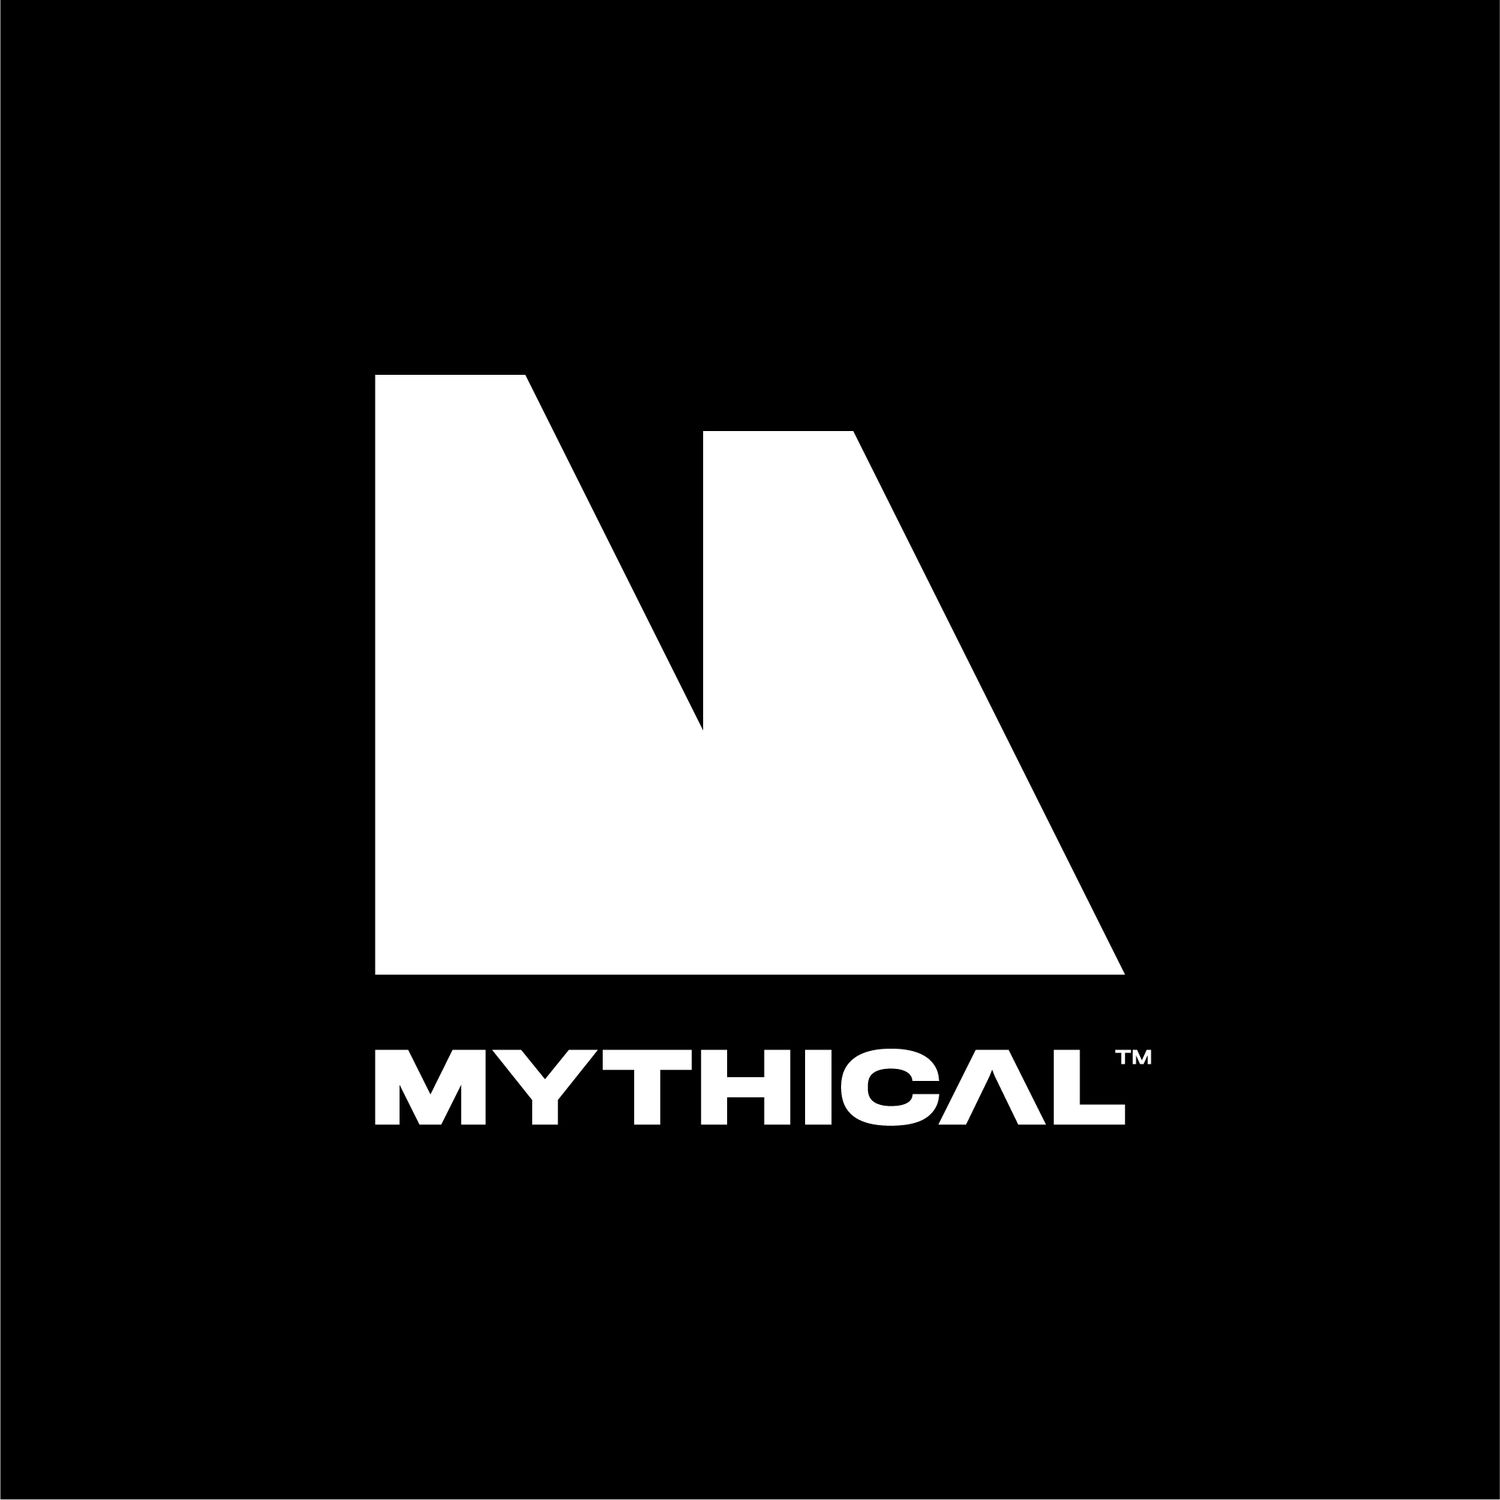 Mythical Games Logo for active job listings